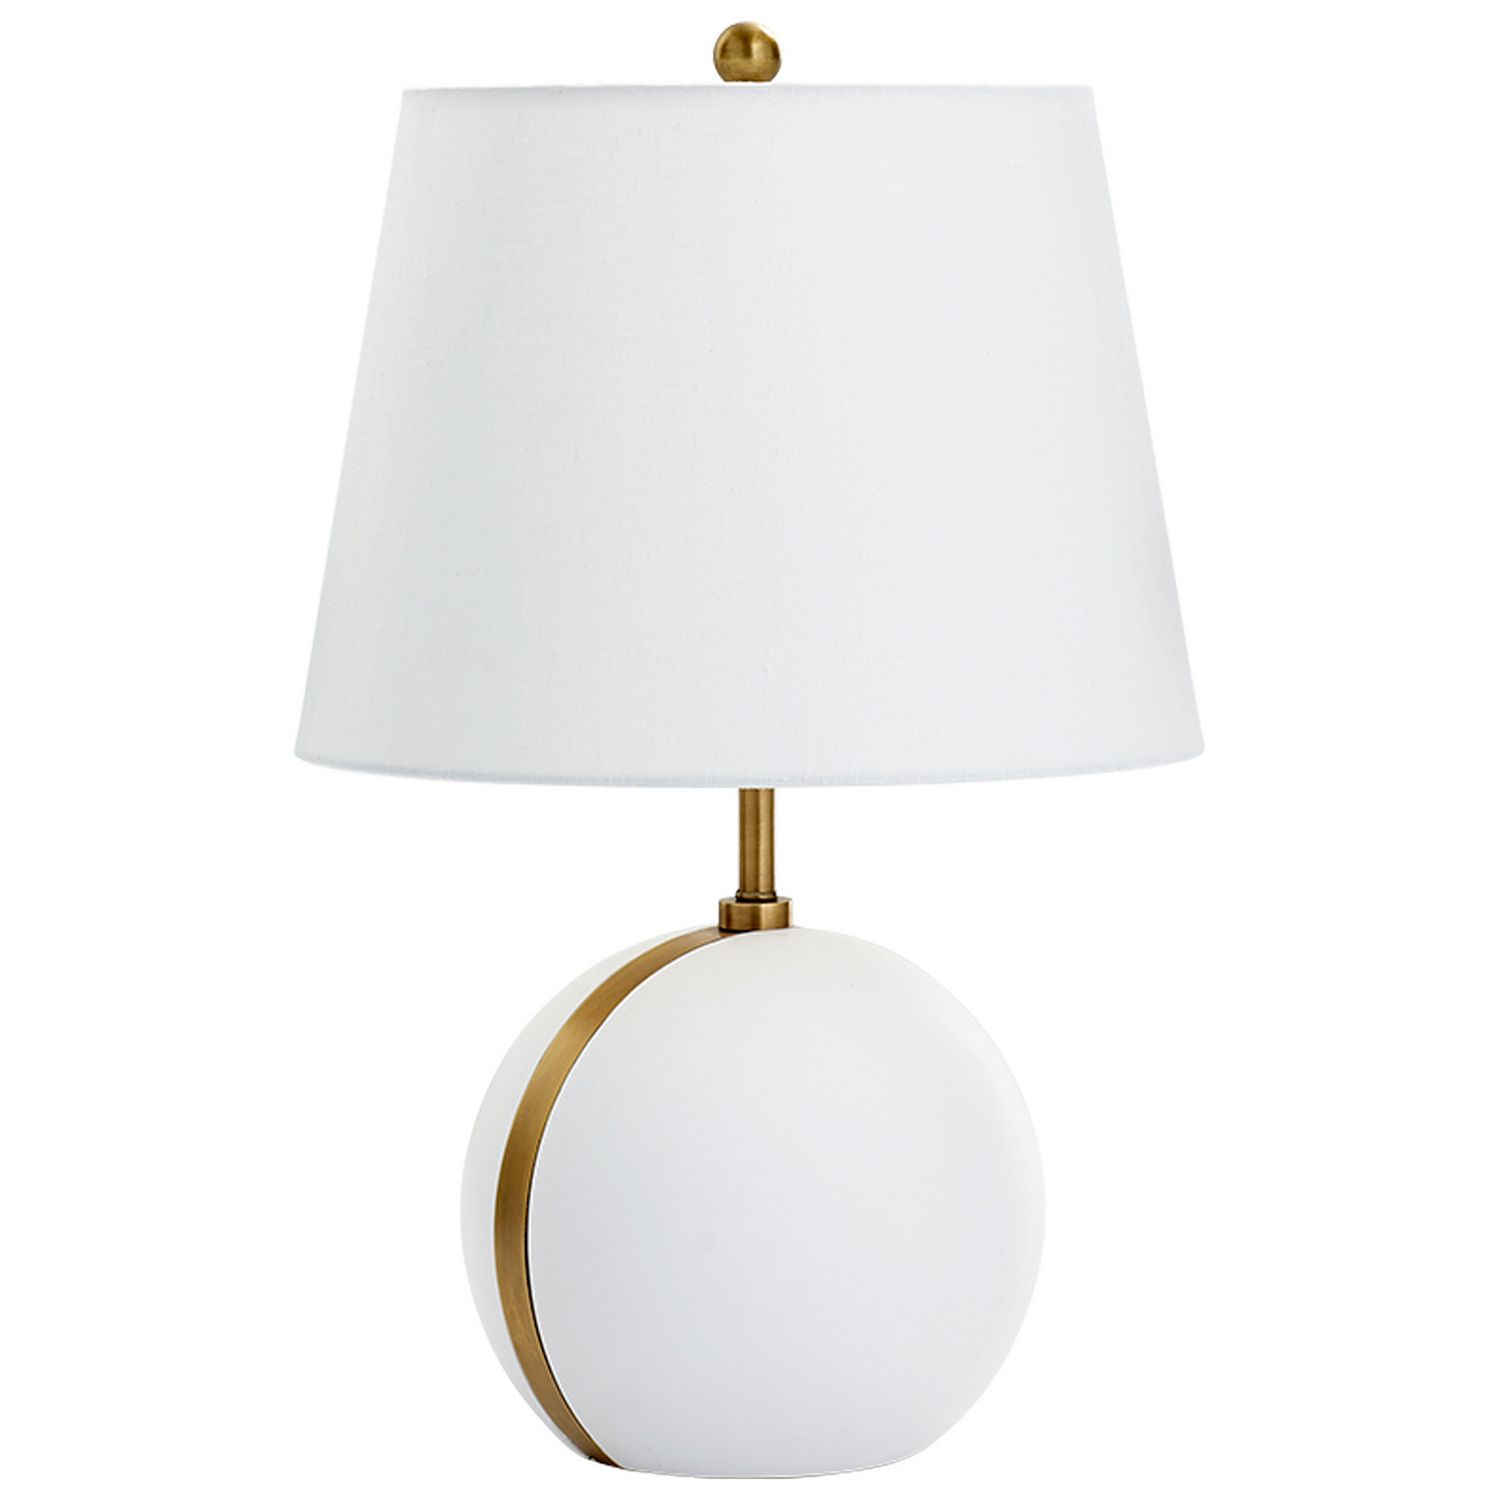 snow moon table lamp katlin unit gold accent lamps white drop leaf and chairs oak side battery wall clocks low wood coffee amish end tables tiffany chandelier value triangle ikea